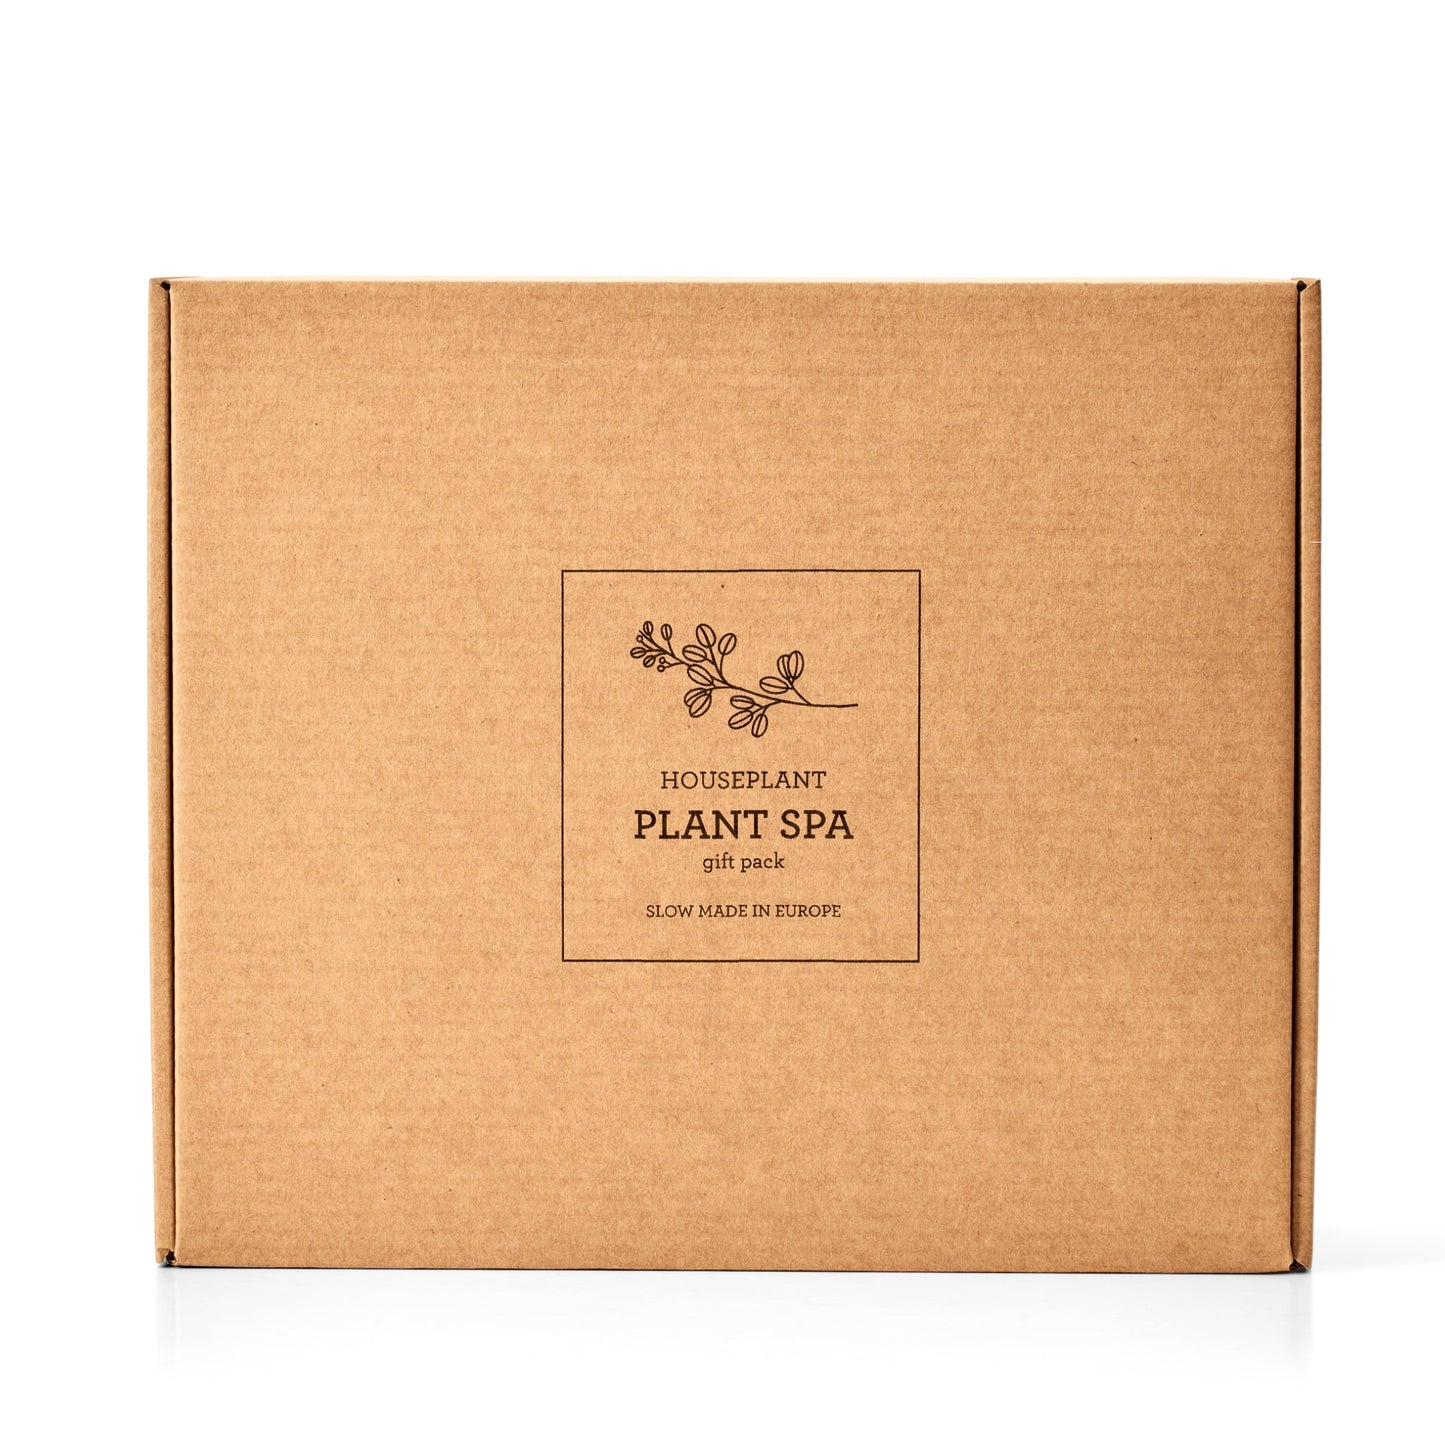 PLANT CLEAN & PROTECT KIT | Christmas Edition (Case of 4 units)